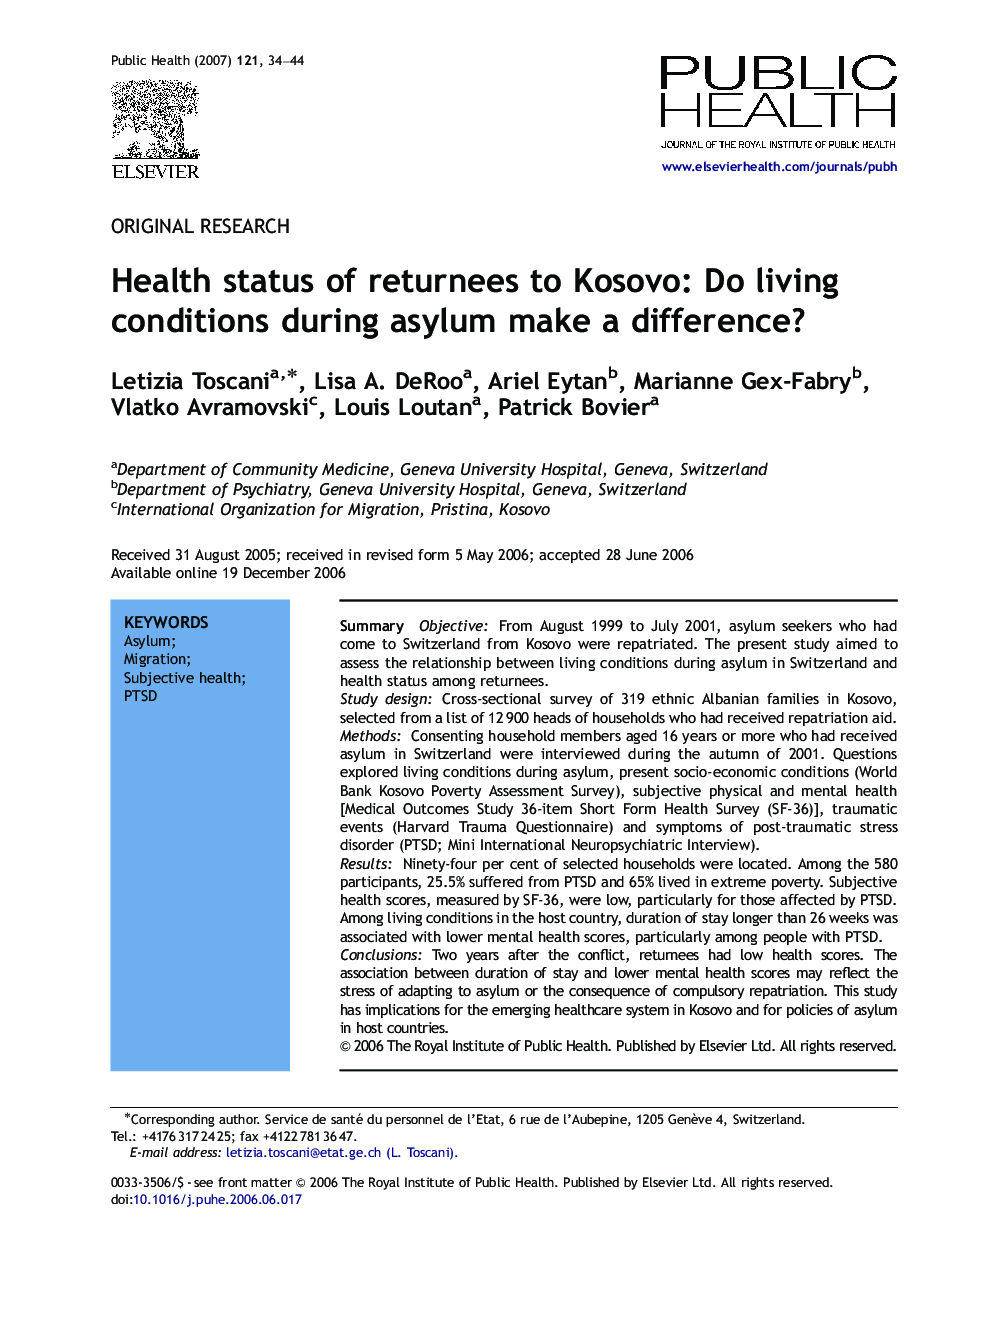 Health status of returnees to Kosovo: Do living conditions during asylum make a difference?